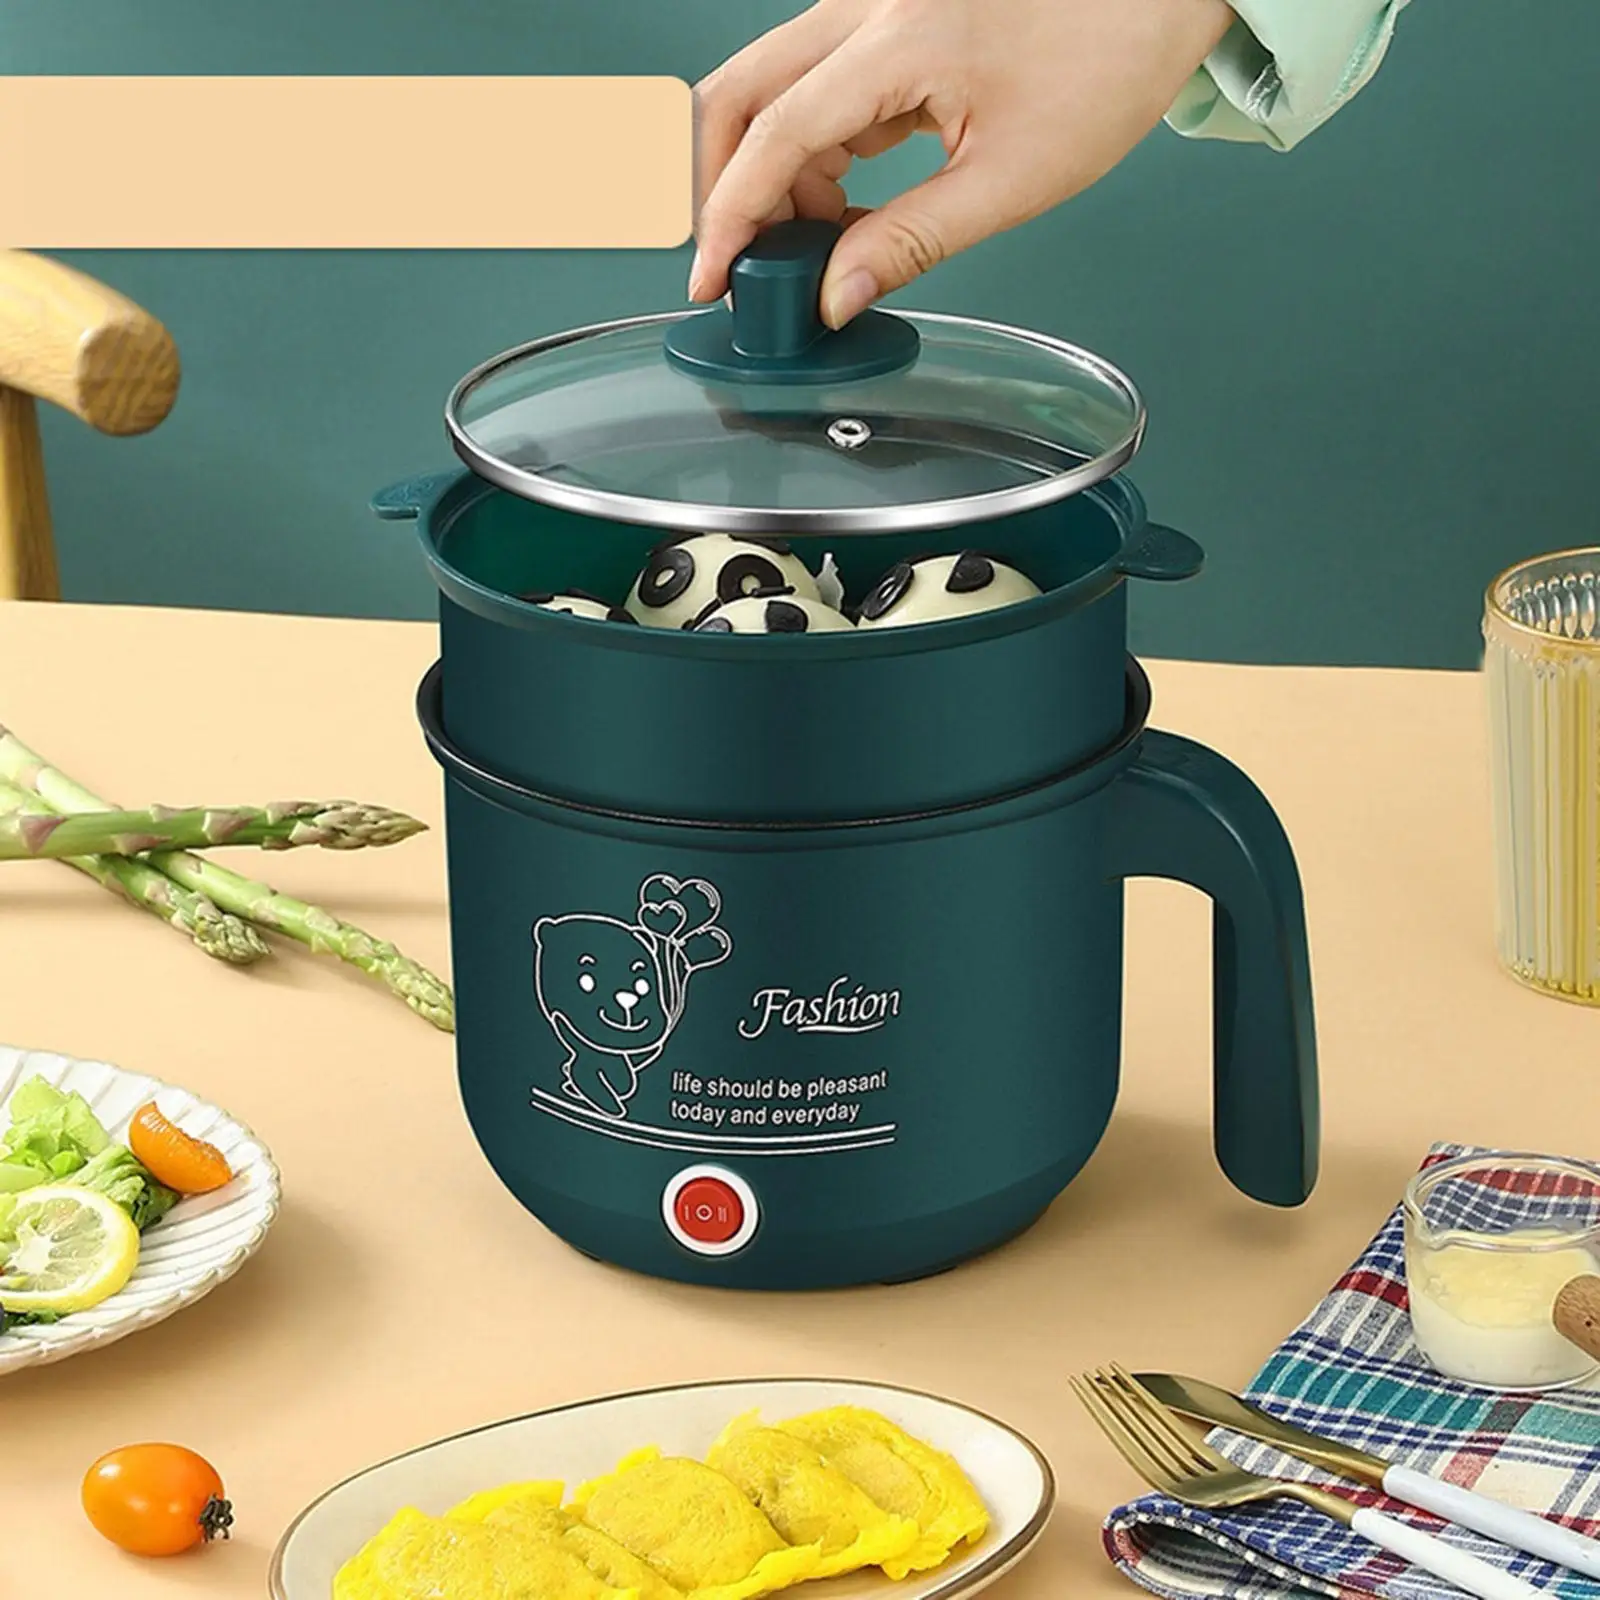 Multifunctional Electric Hot Pot Cooker Steamer with Steamer for Dormitory